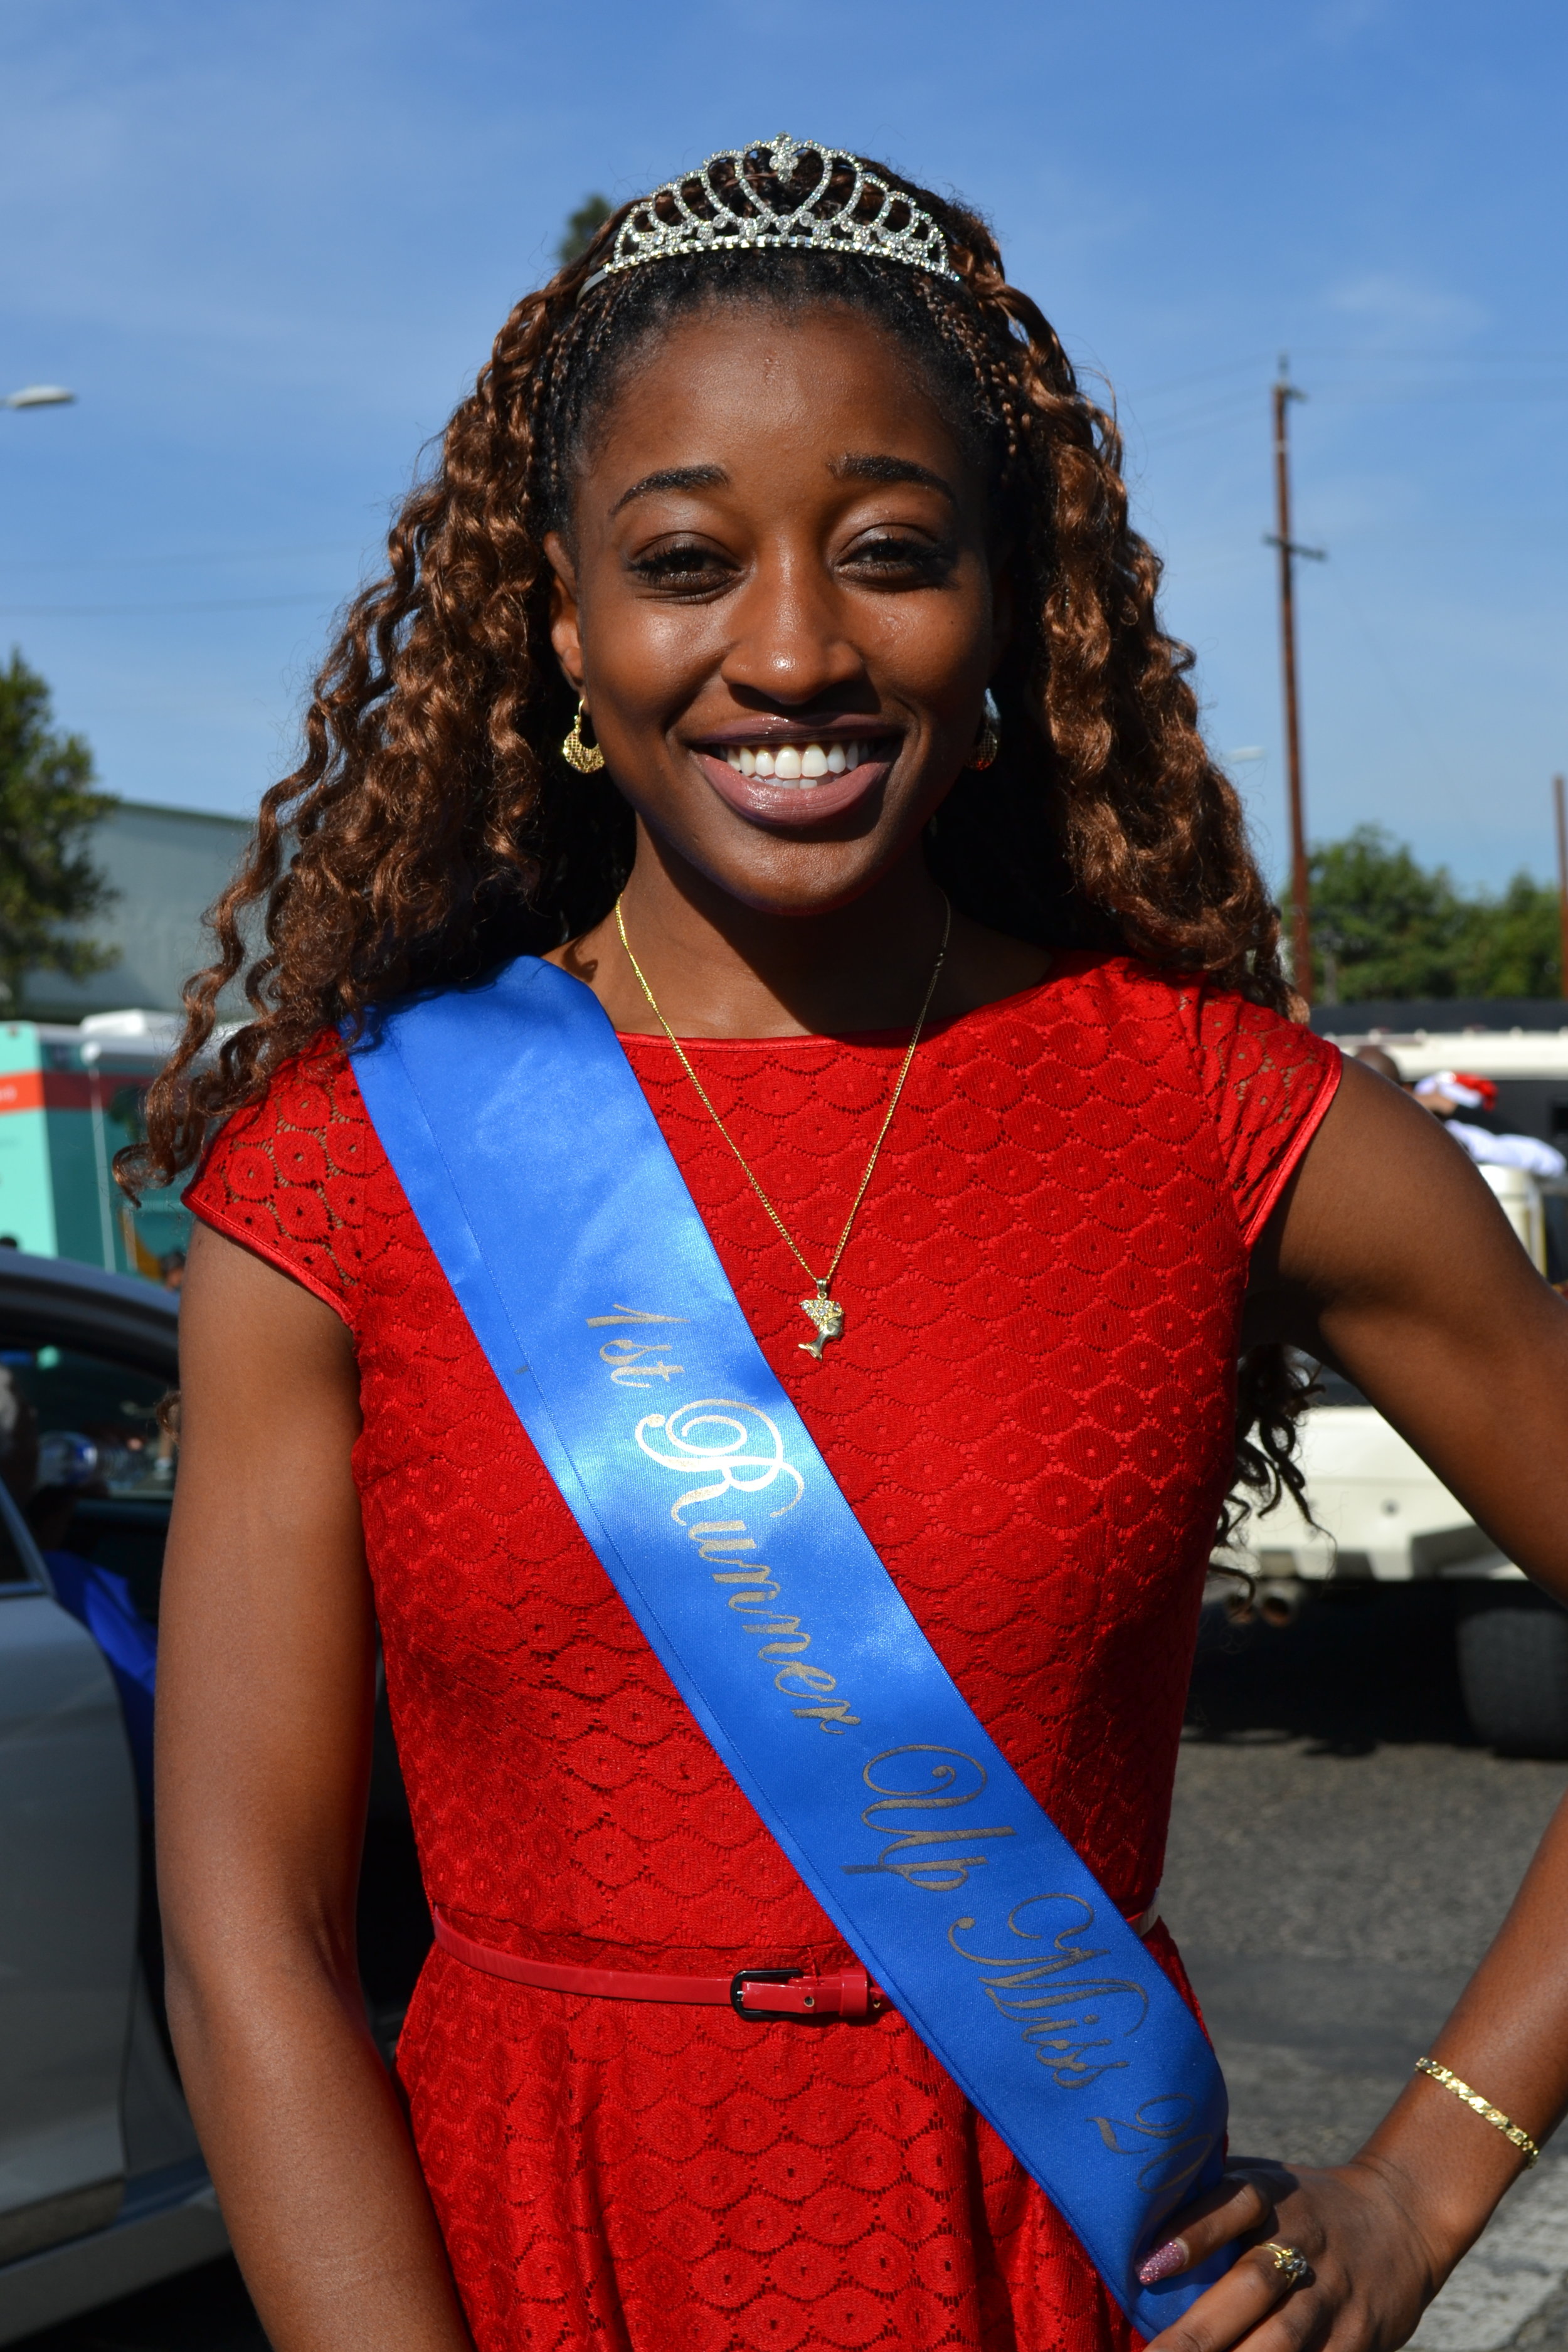 Patrice Royal, 2017 Miss Compton 1st Runner-Up at the 52nd Annual Watts Christmas Parade.